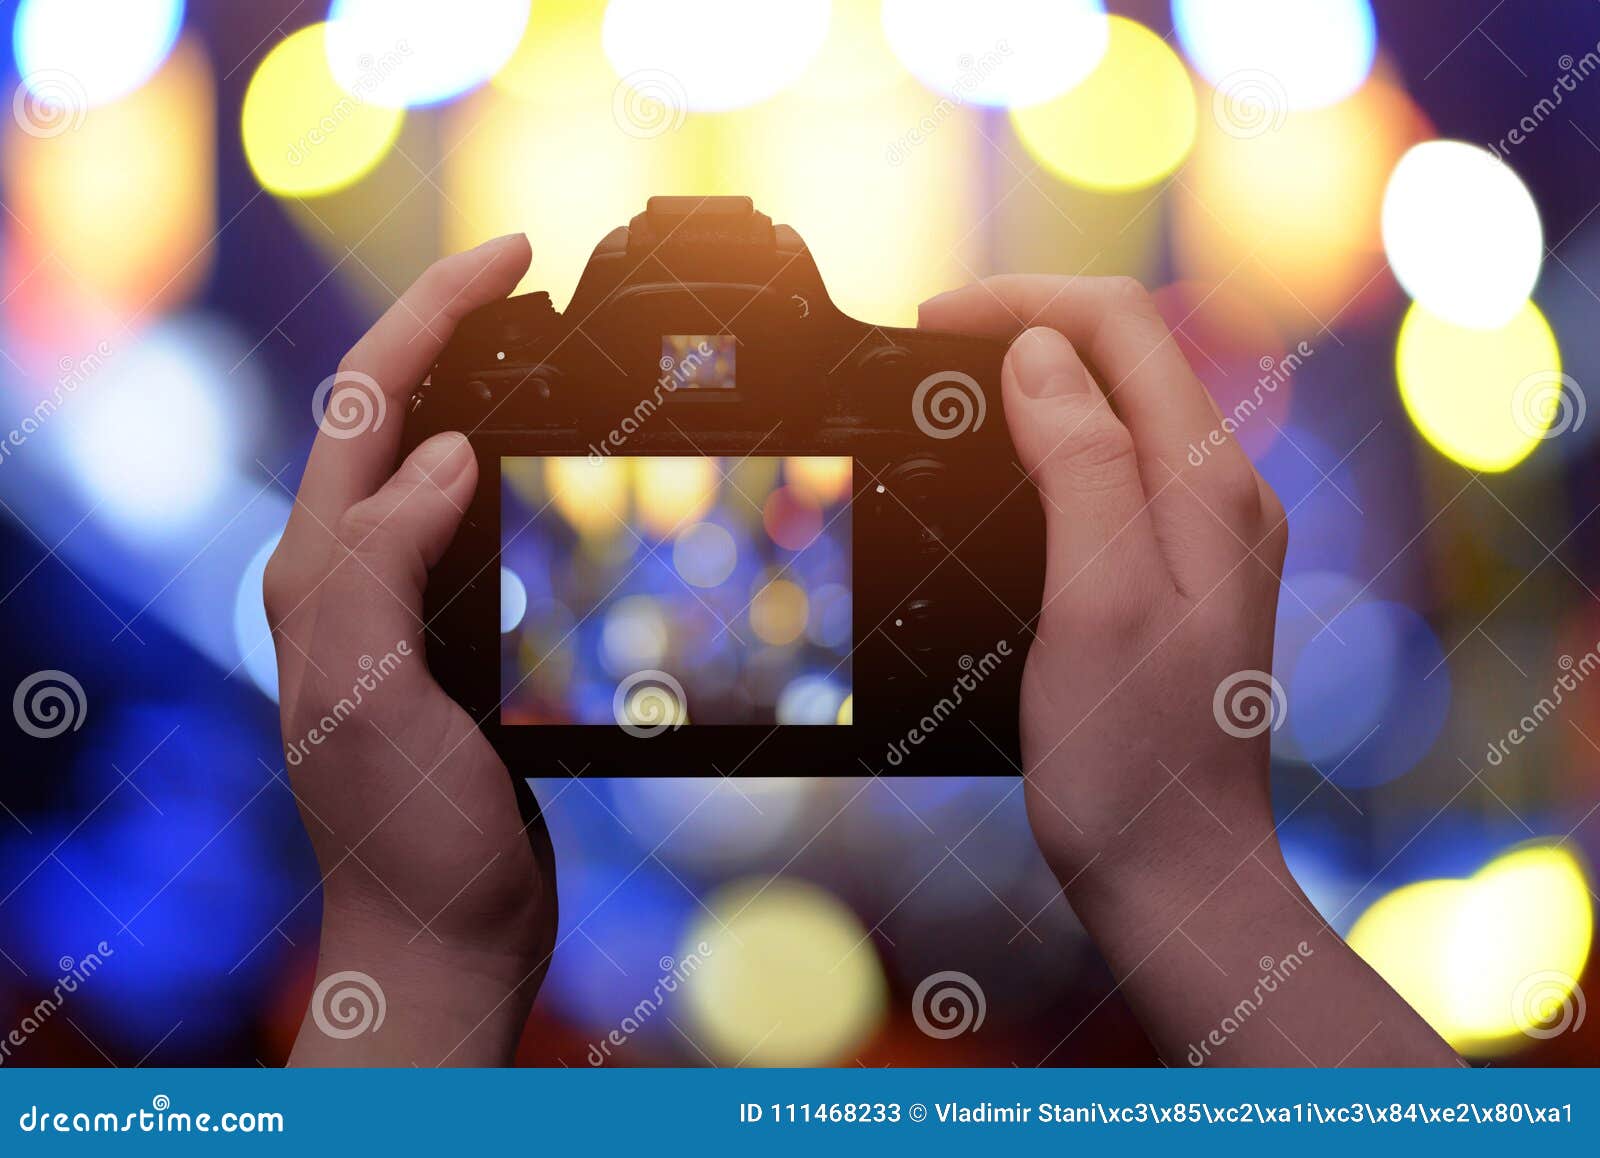 profesional digital camera in hands. blue and yellow bokeh in background